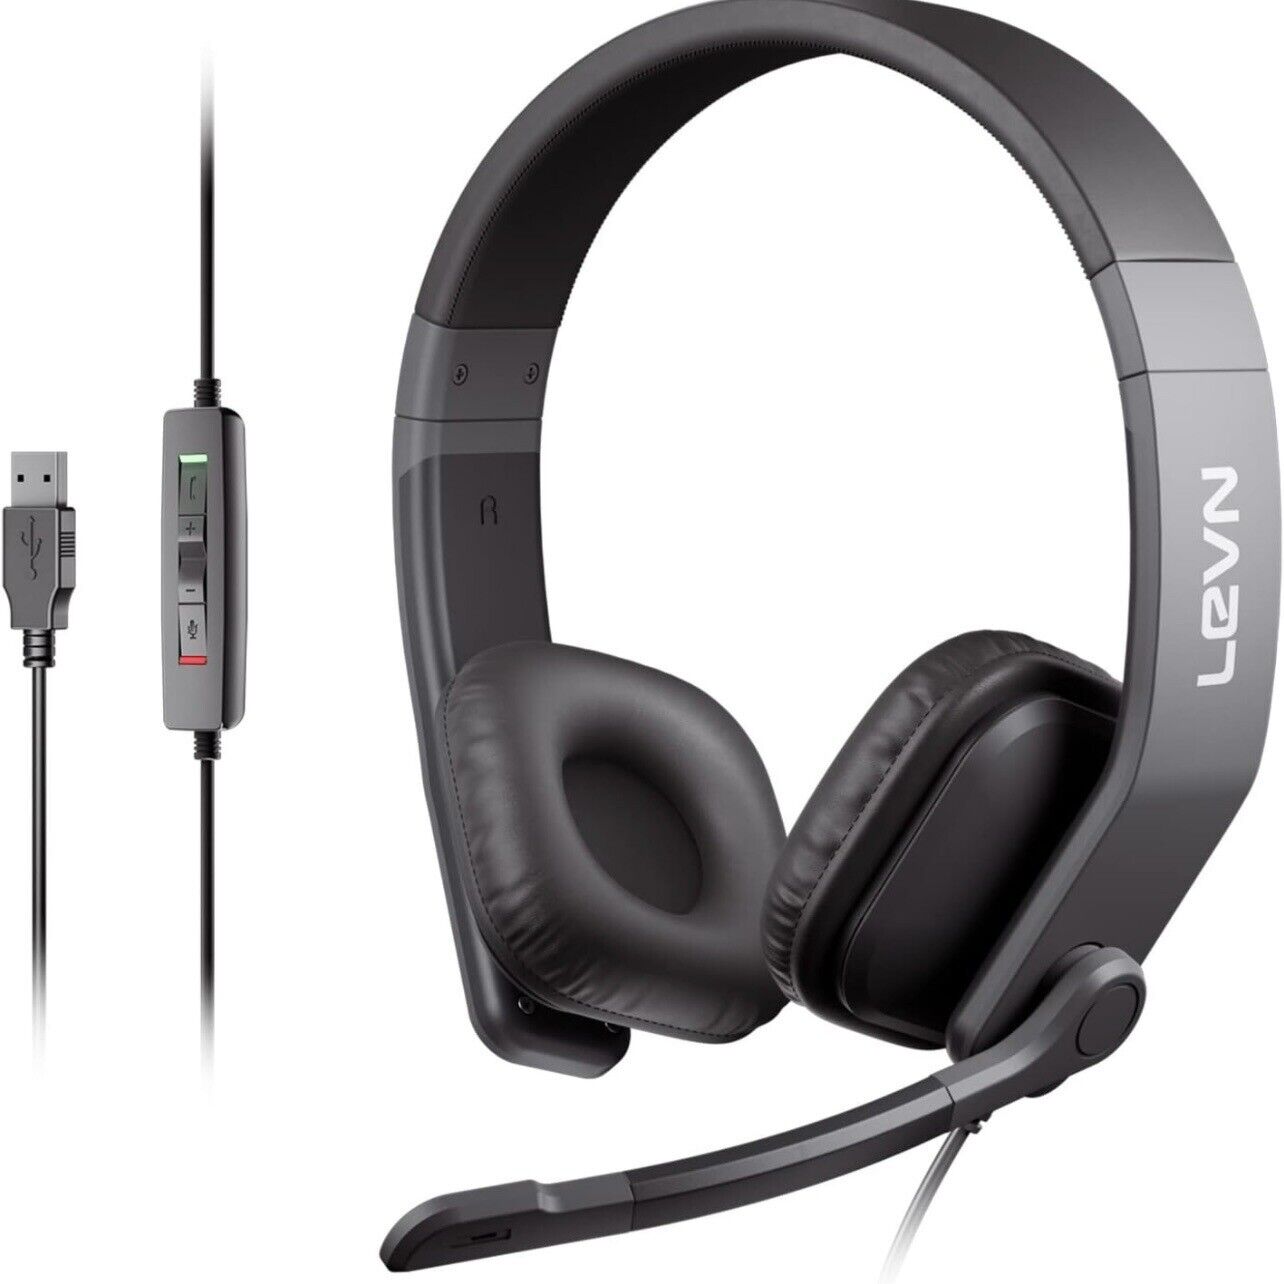 Wired Headset USB Headset with Microphone for PC Noise Cancelling